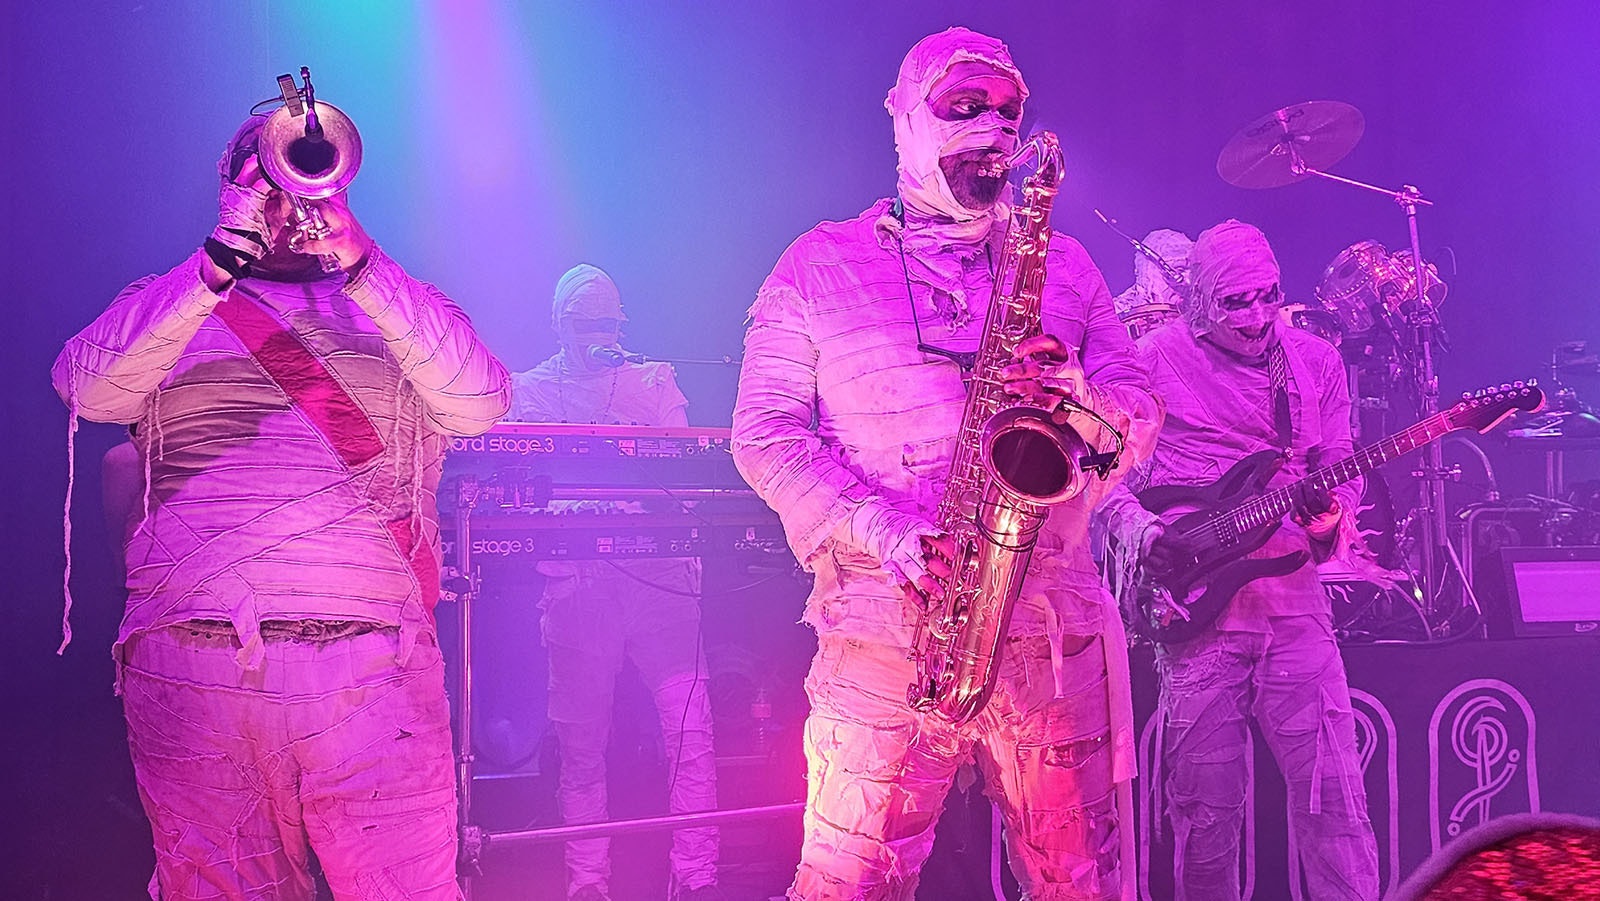 The Mummies play to an enthusiastic audience at the Frozen Dead Guy Days Blue Ball.